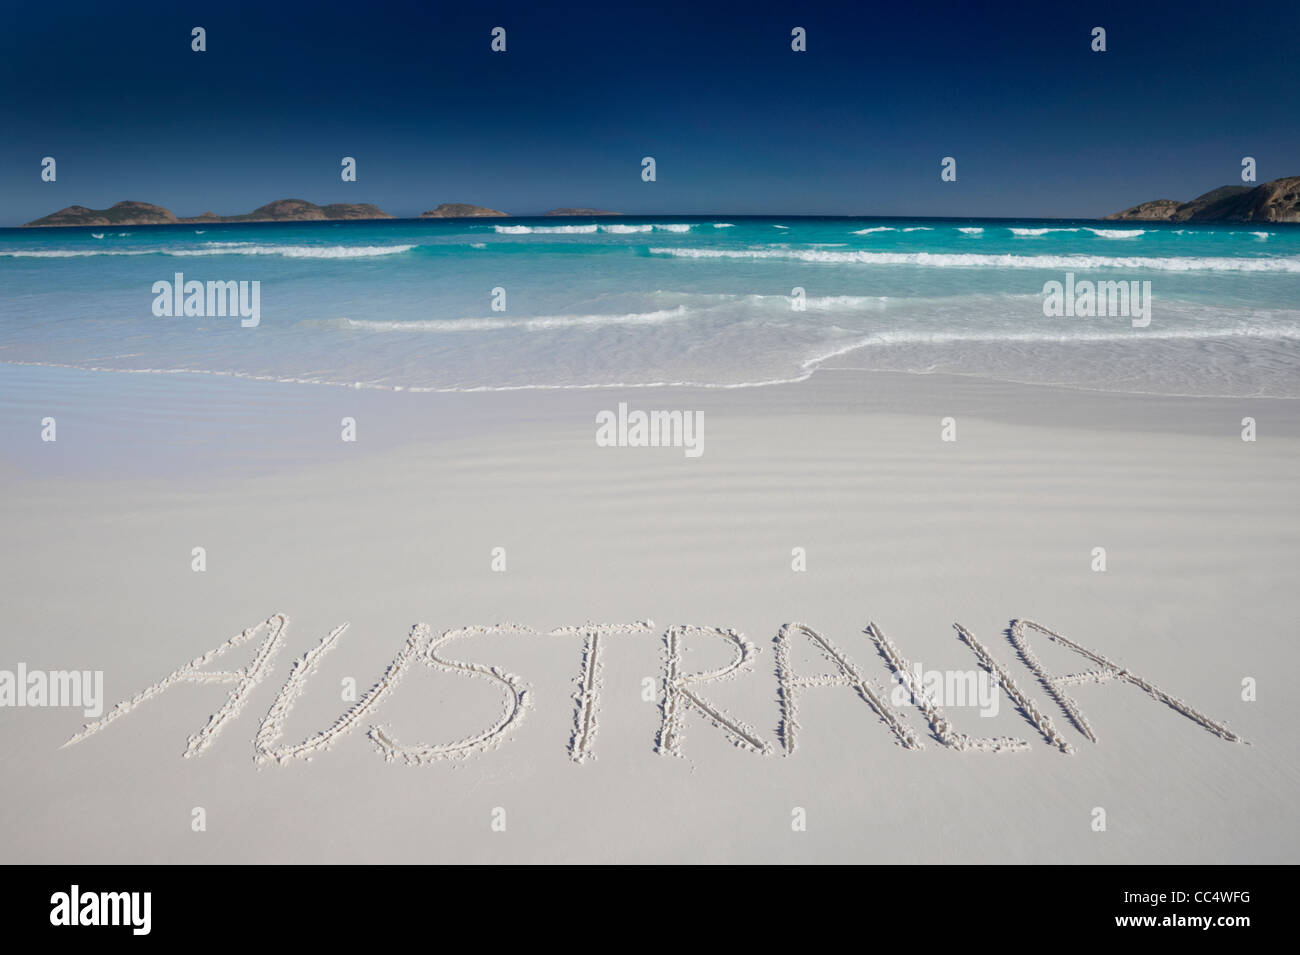 Australia Written In Sand Lucky Bay Cape Le Grand National Park Stock Photo Alamy